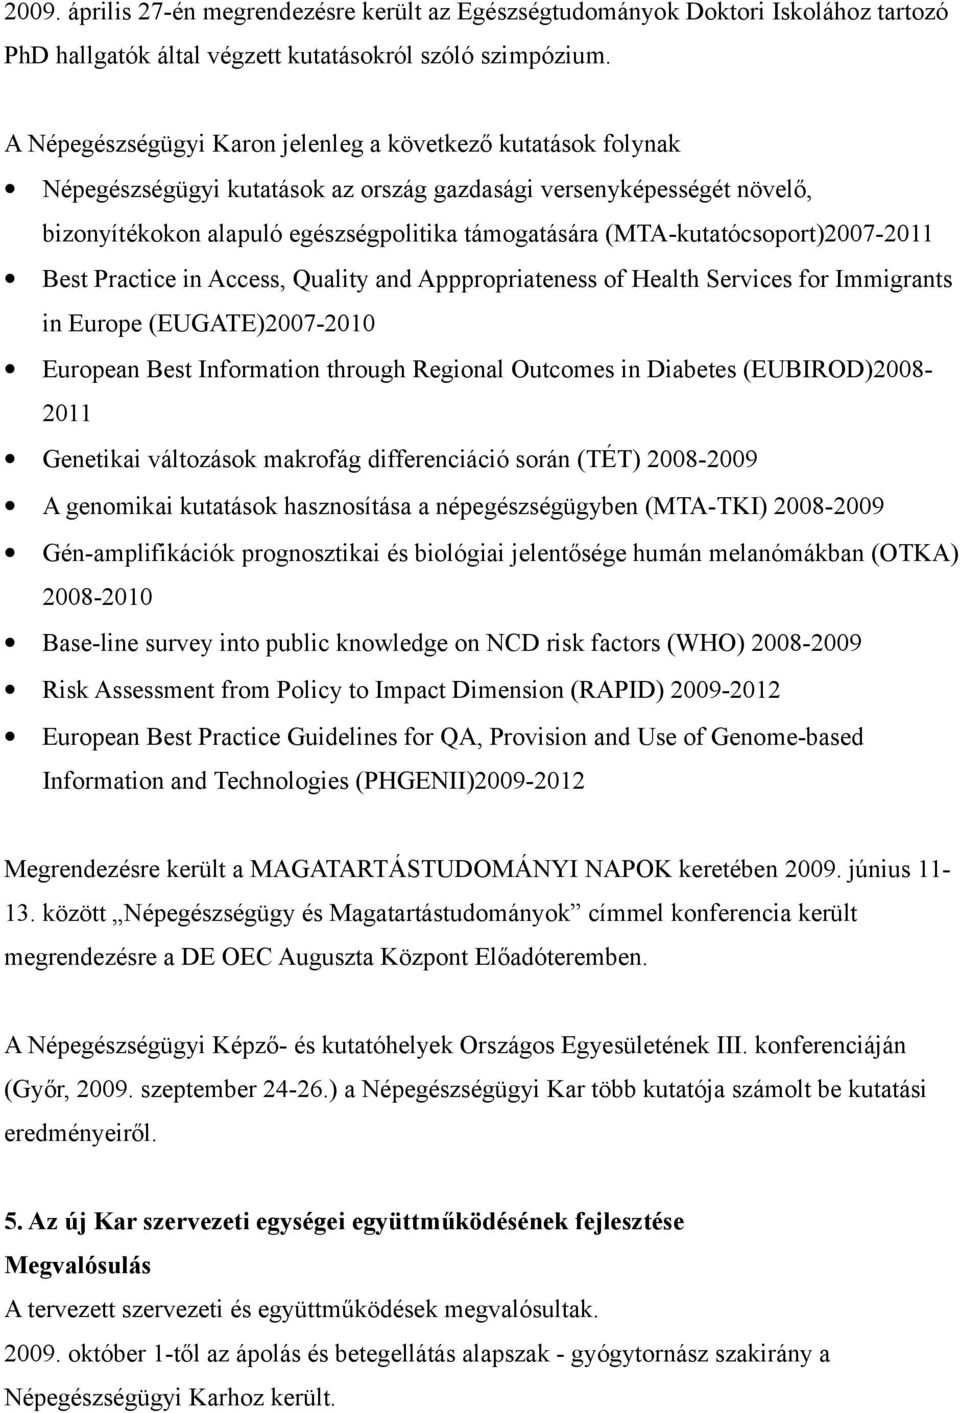 (MTA-kutatócsoport)2007-2011 Best Practice in Access, Quality and Apppropriateness of Health Services for Immigrants in Europe (EUGATE)2007-2010 European Best Information through Regional Outcomes in